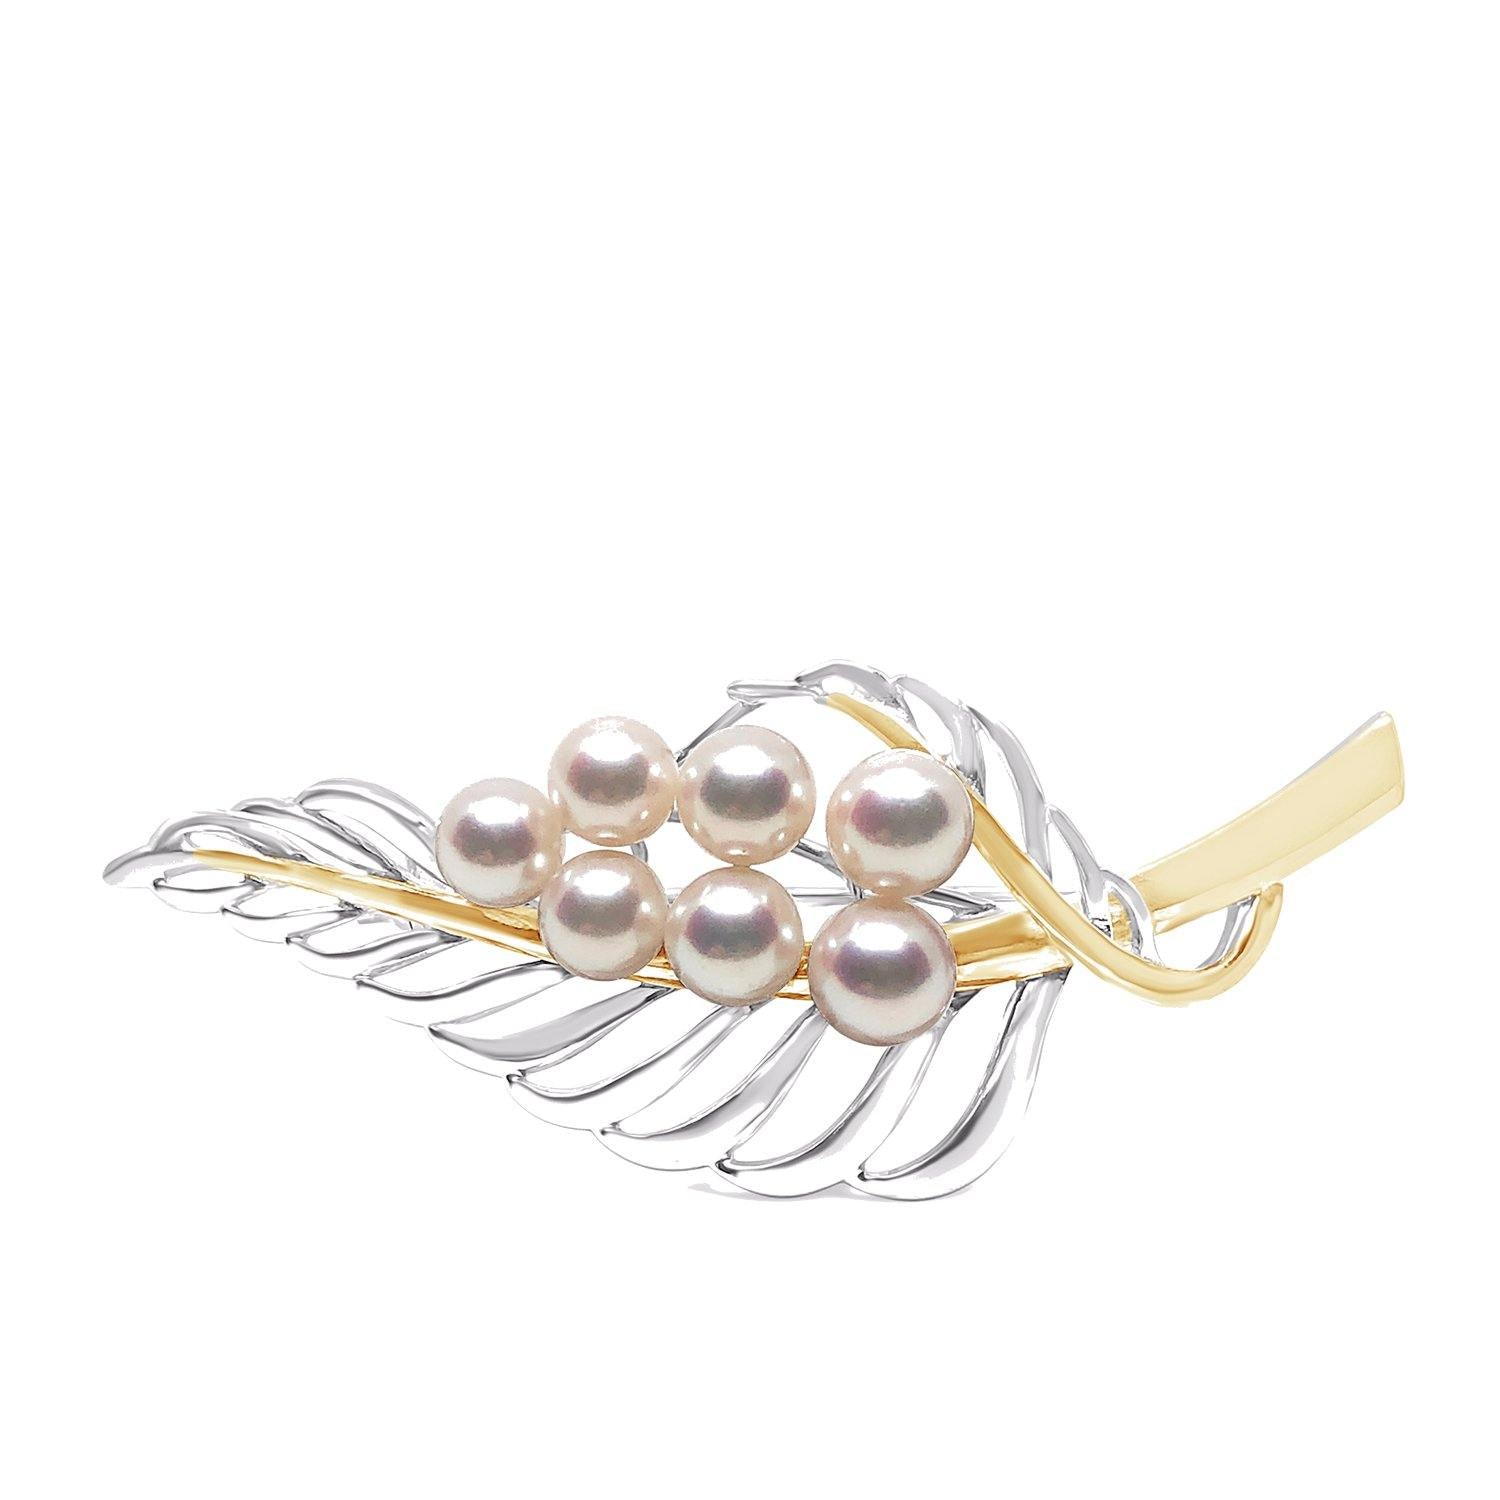 Floral Japanese Saltwater Akoya Pearl Brooch- 18K Yellow Gold Sterling Silver